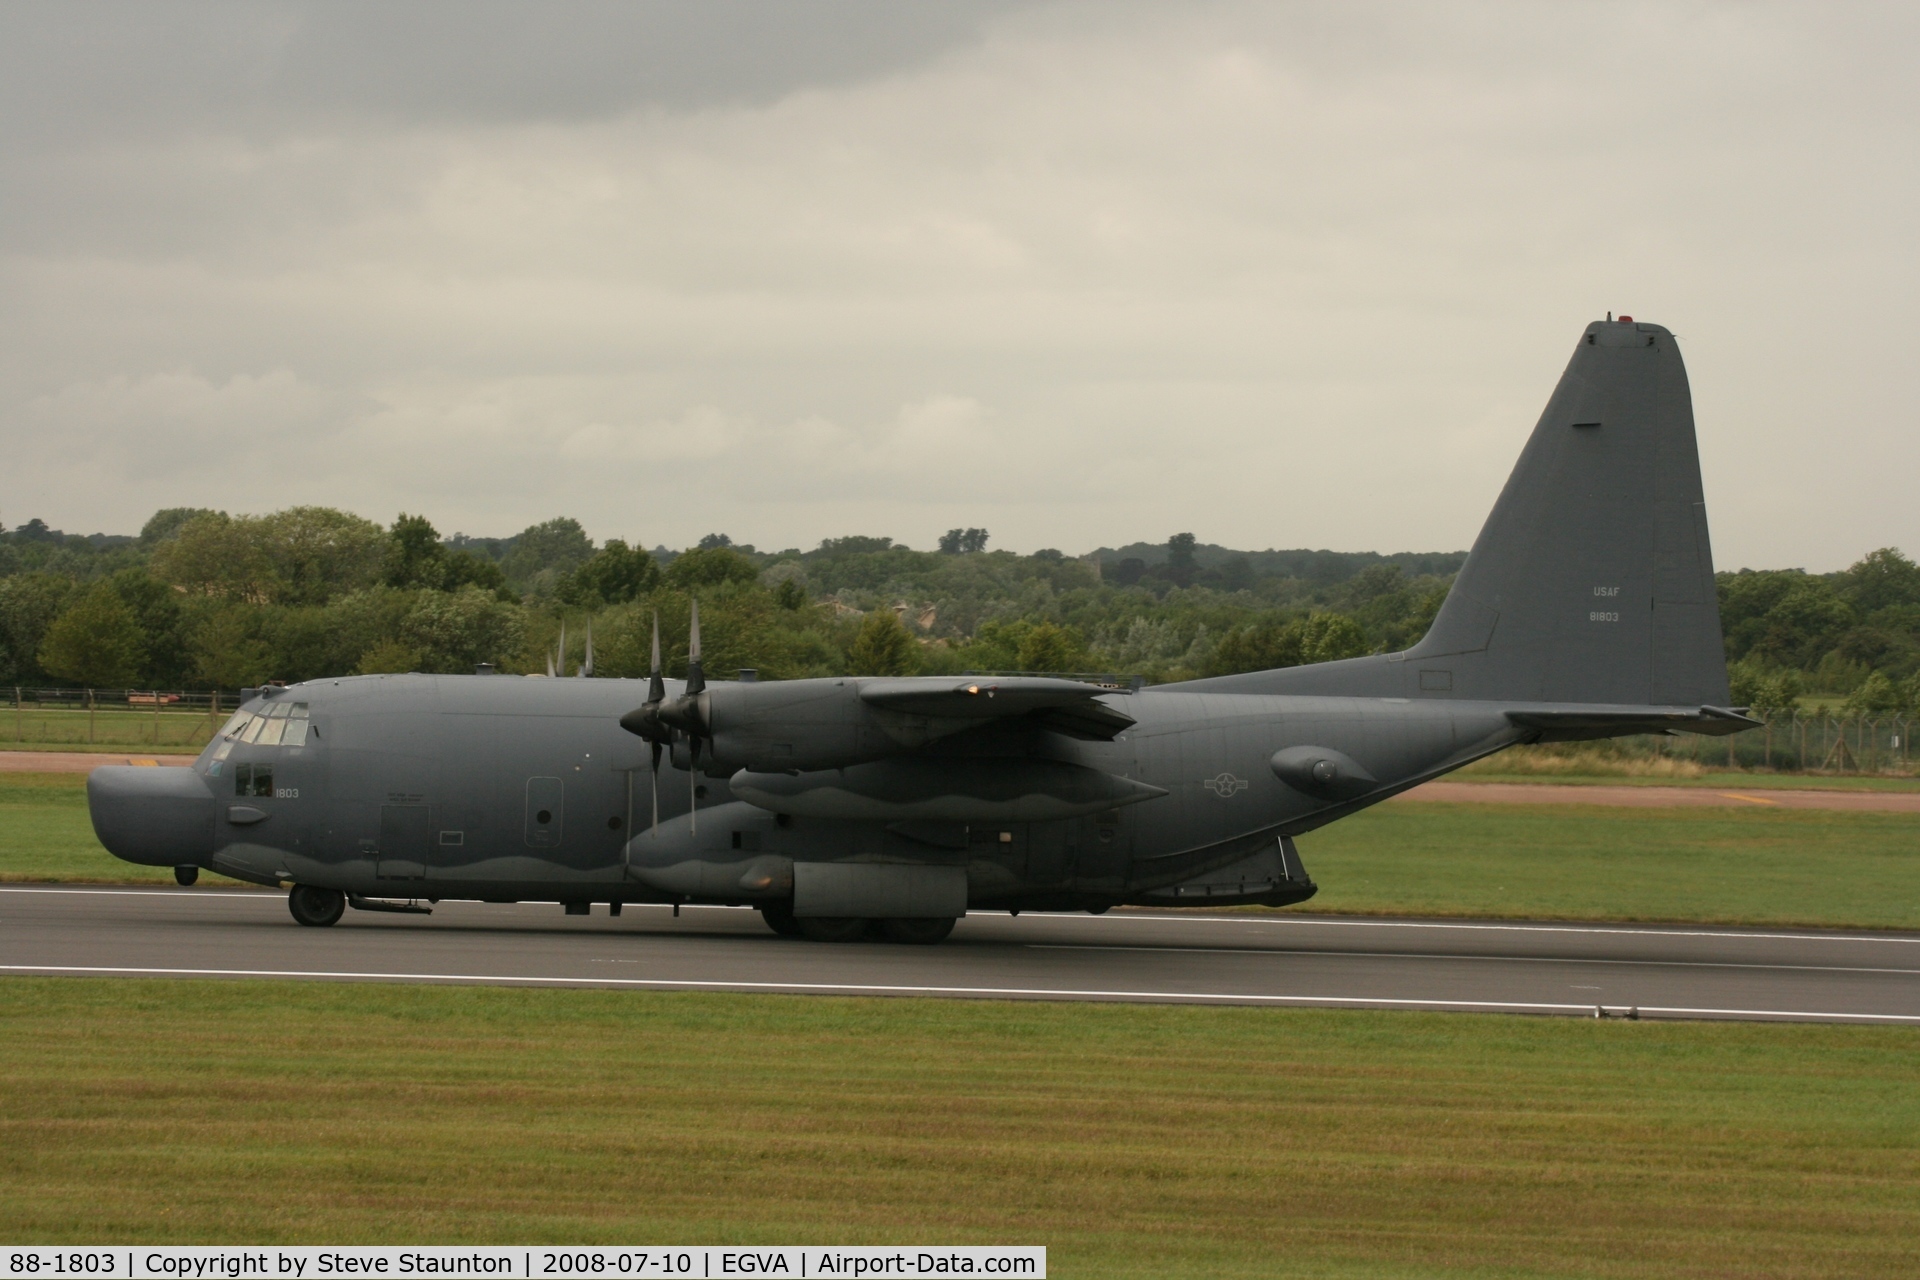 88-1803, 1988 Lockheed MC-130H Combat Talon II C/N 382-5173, Taken at the Royal International Air Tattoo 2008 during arrivals and departures (show days cancelled due to bad weather)